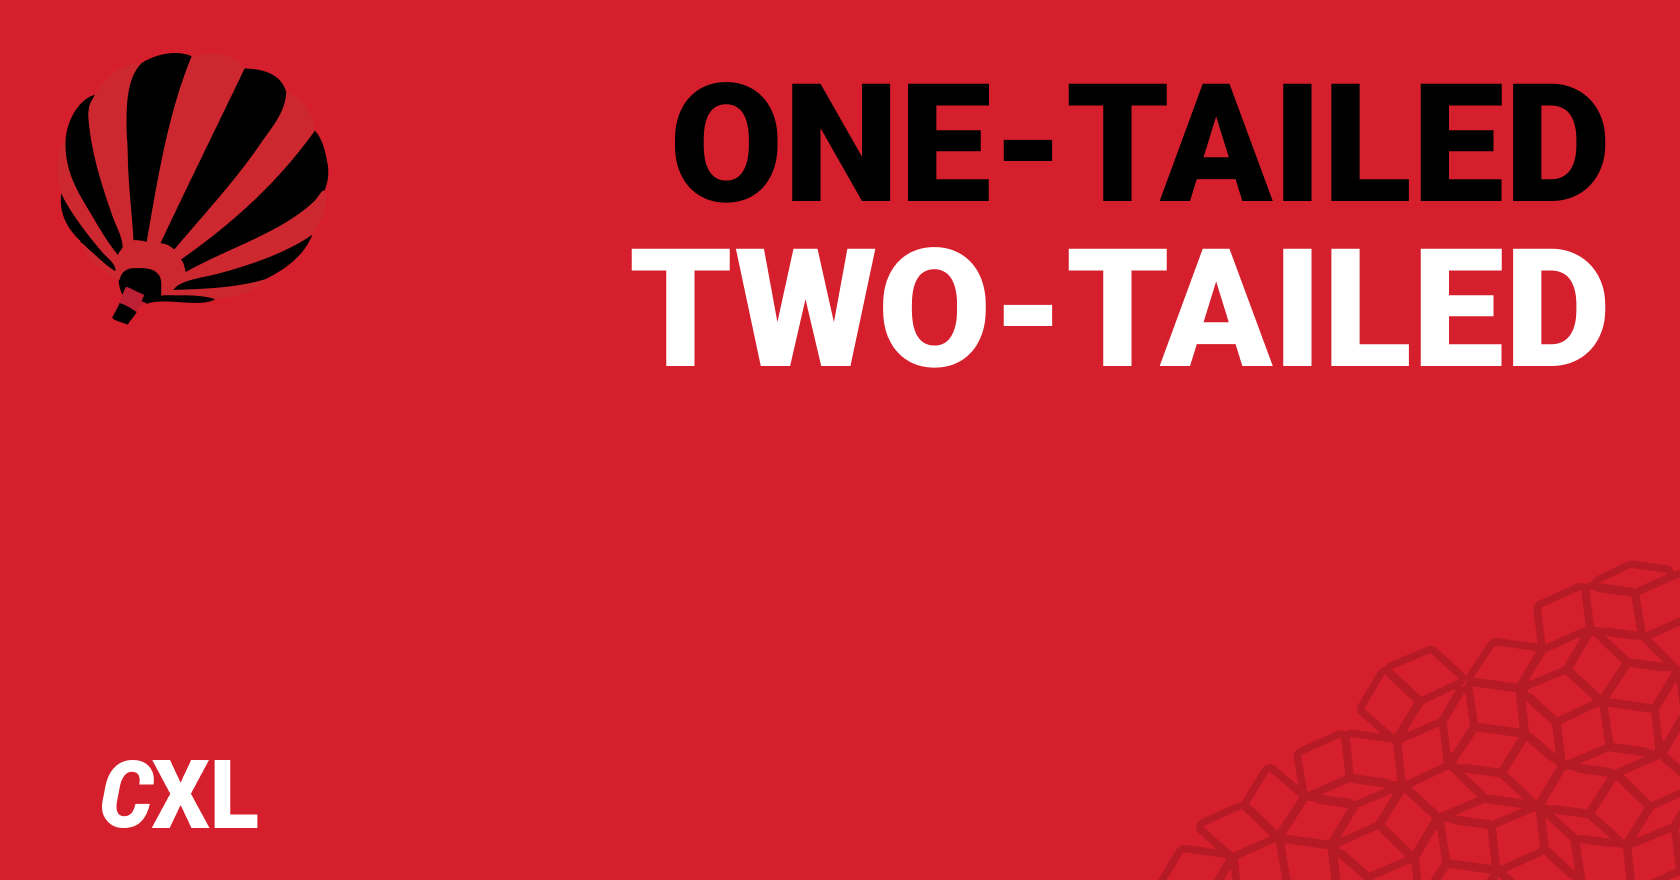 FAQ: What are the differences between one-tailed and two-tailed tests?